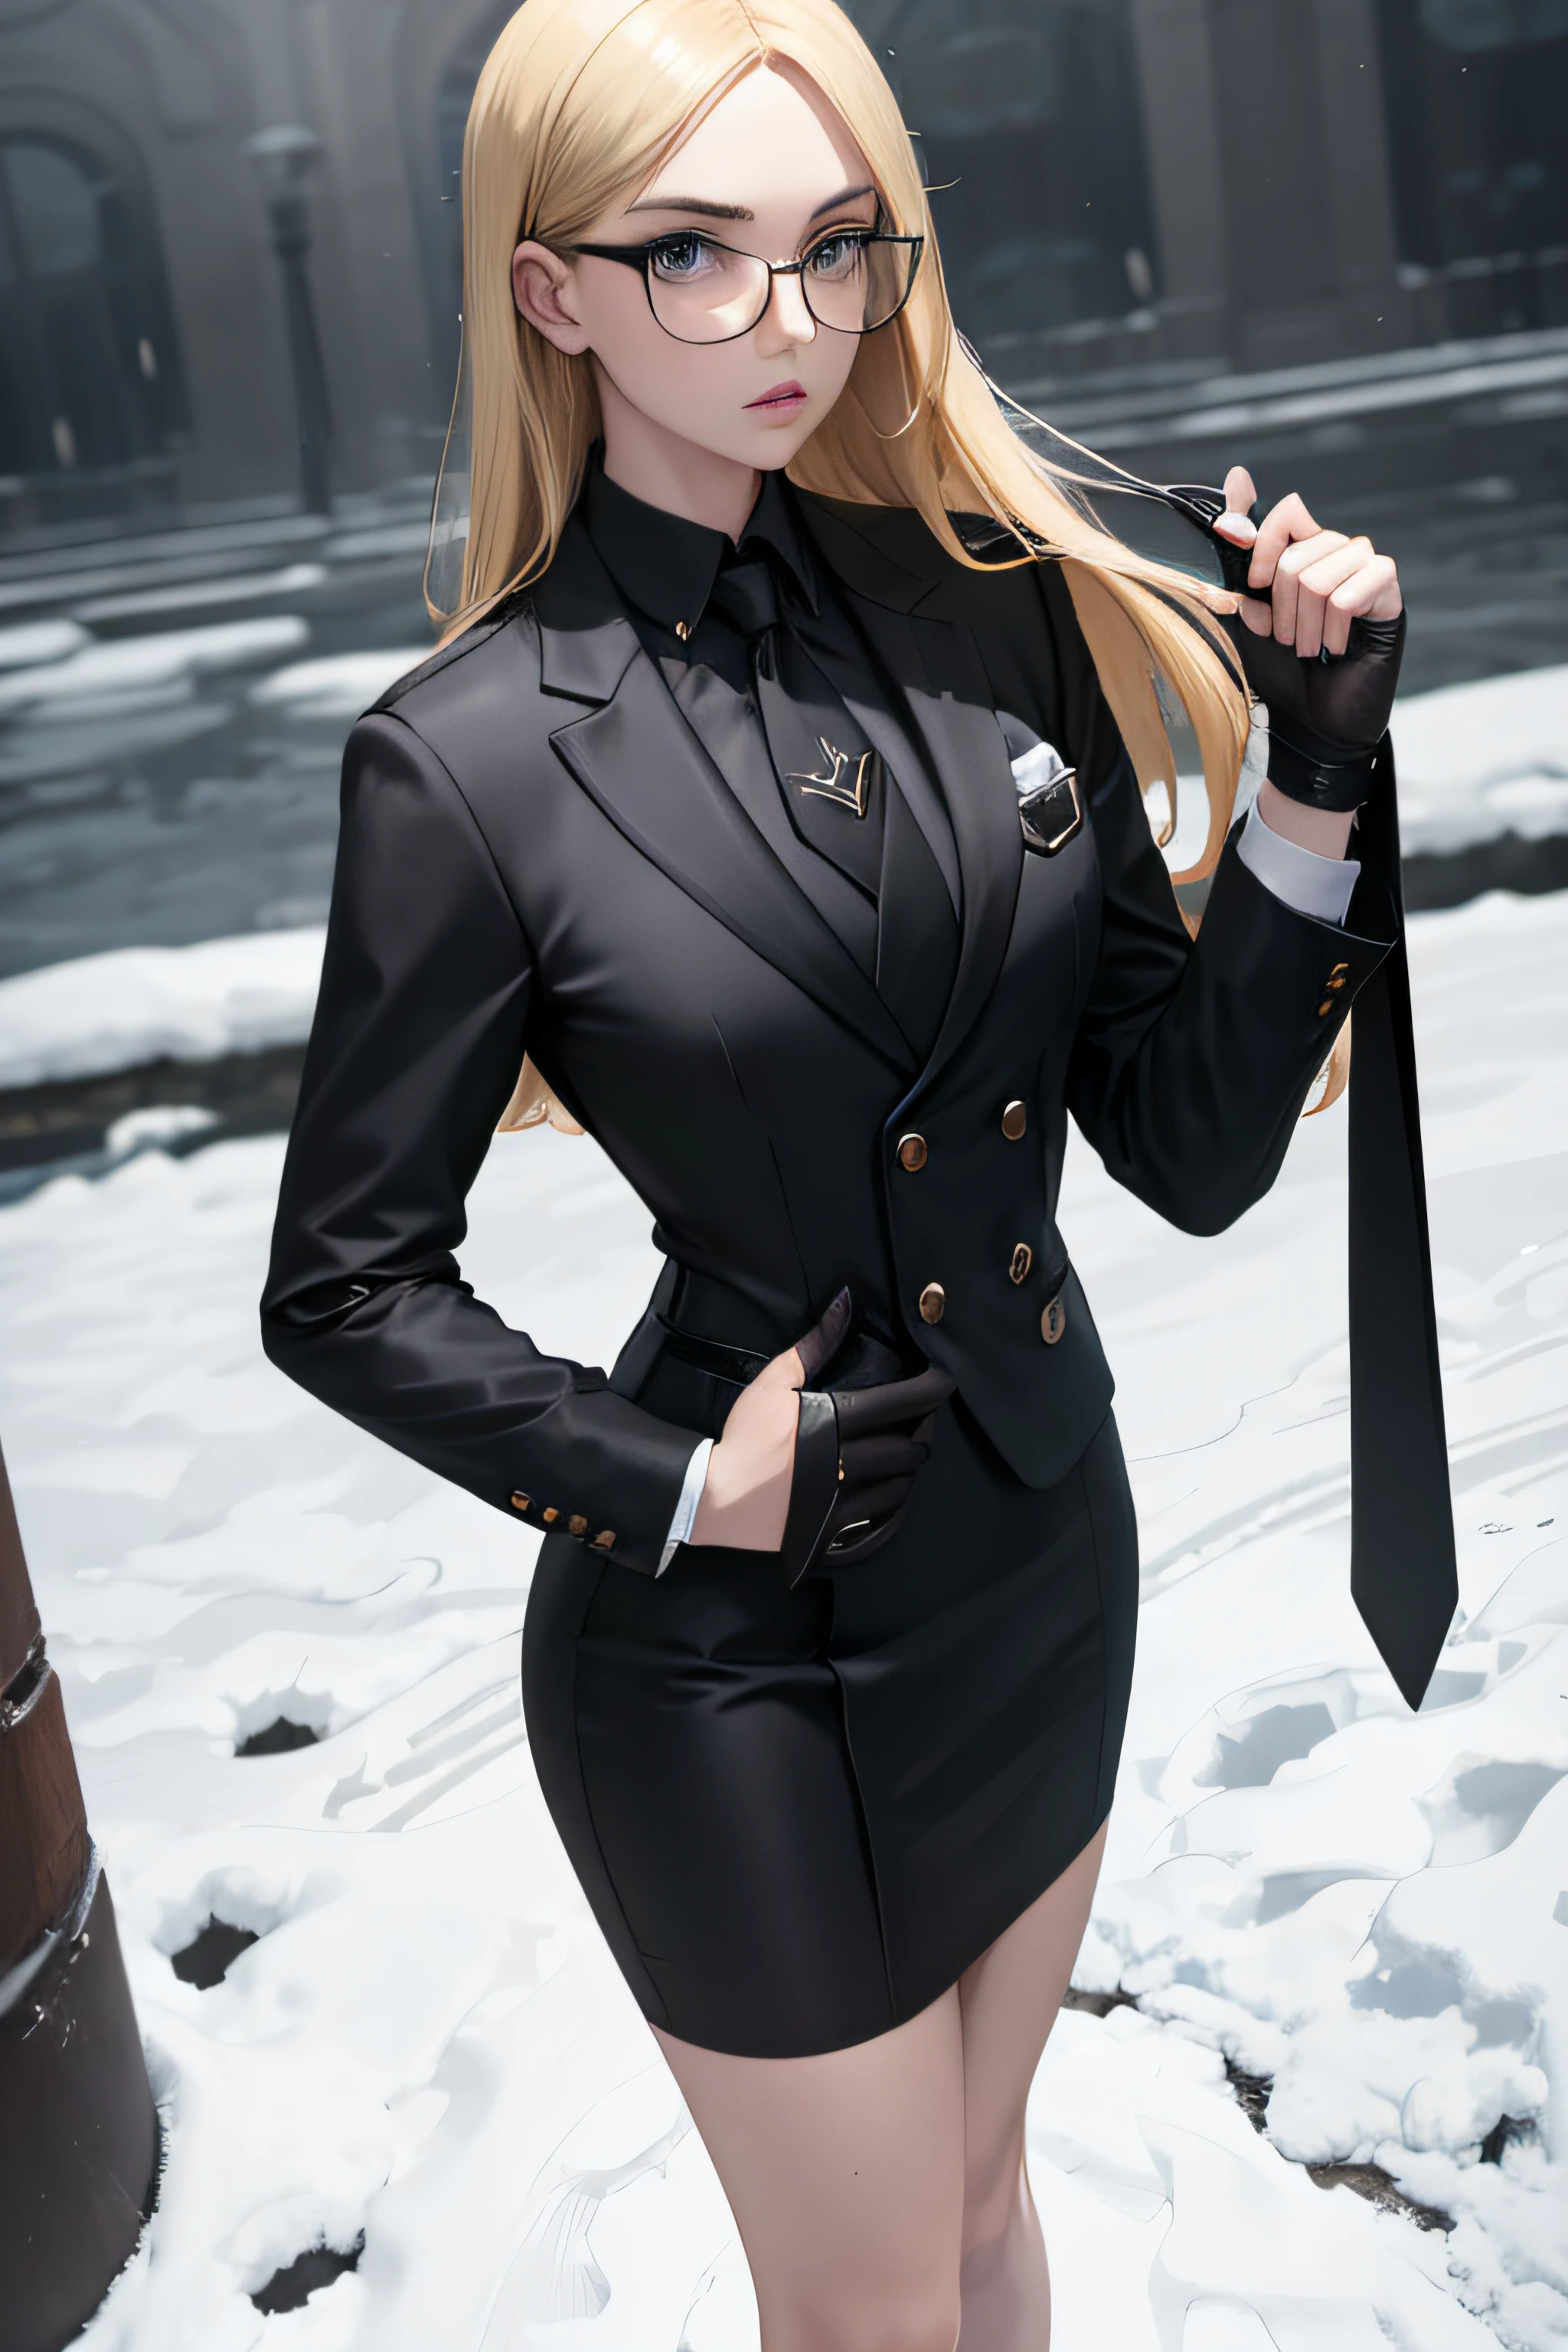 masterpiece, best quality, sfKolin, glasses, black shiny skirt suit, (((three-piece suit))), necktie, blazer, suit jacket, waistcoat, bodycon skirt, snow, grey sky, holding clipboard, furowed brow, serious, looking at viewer, standing